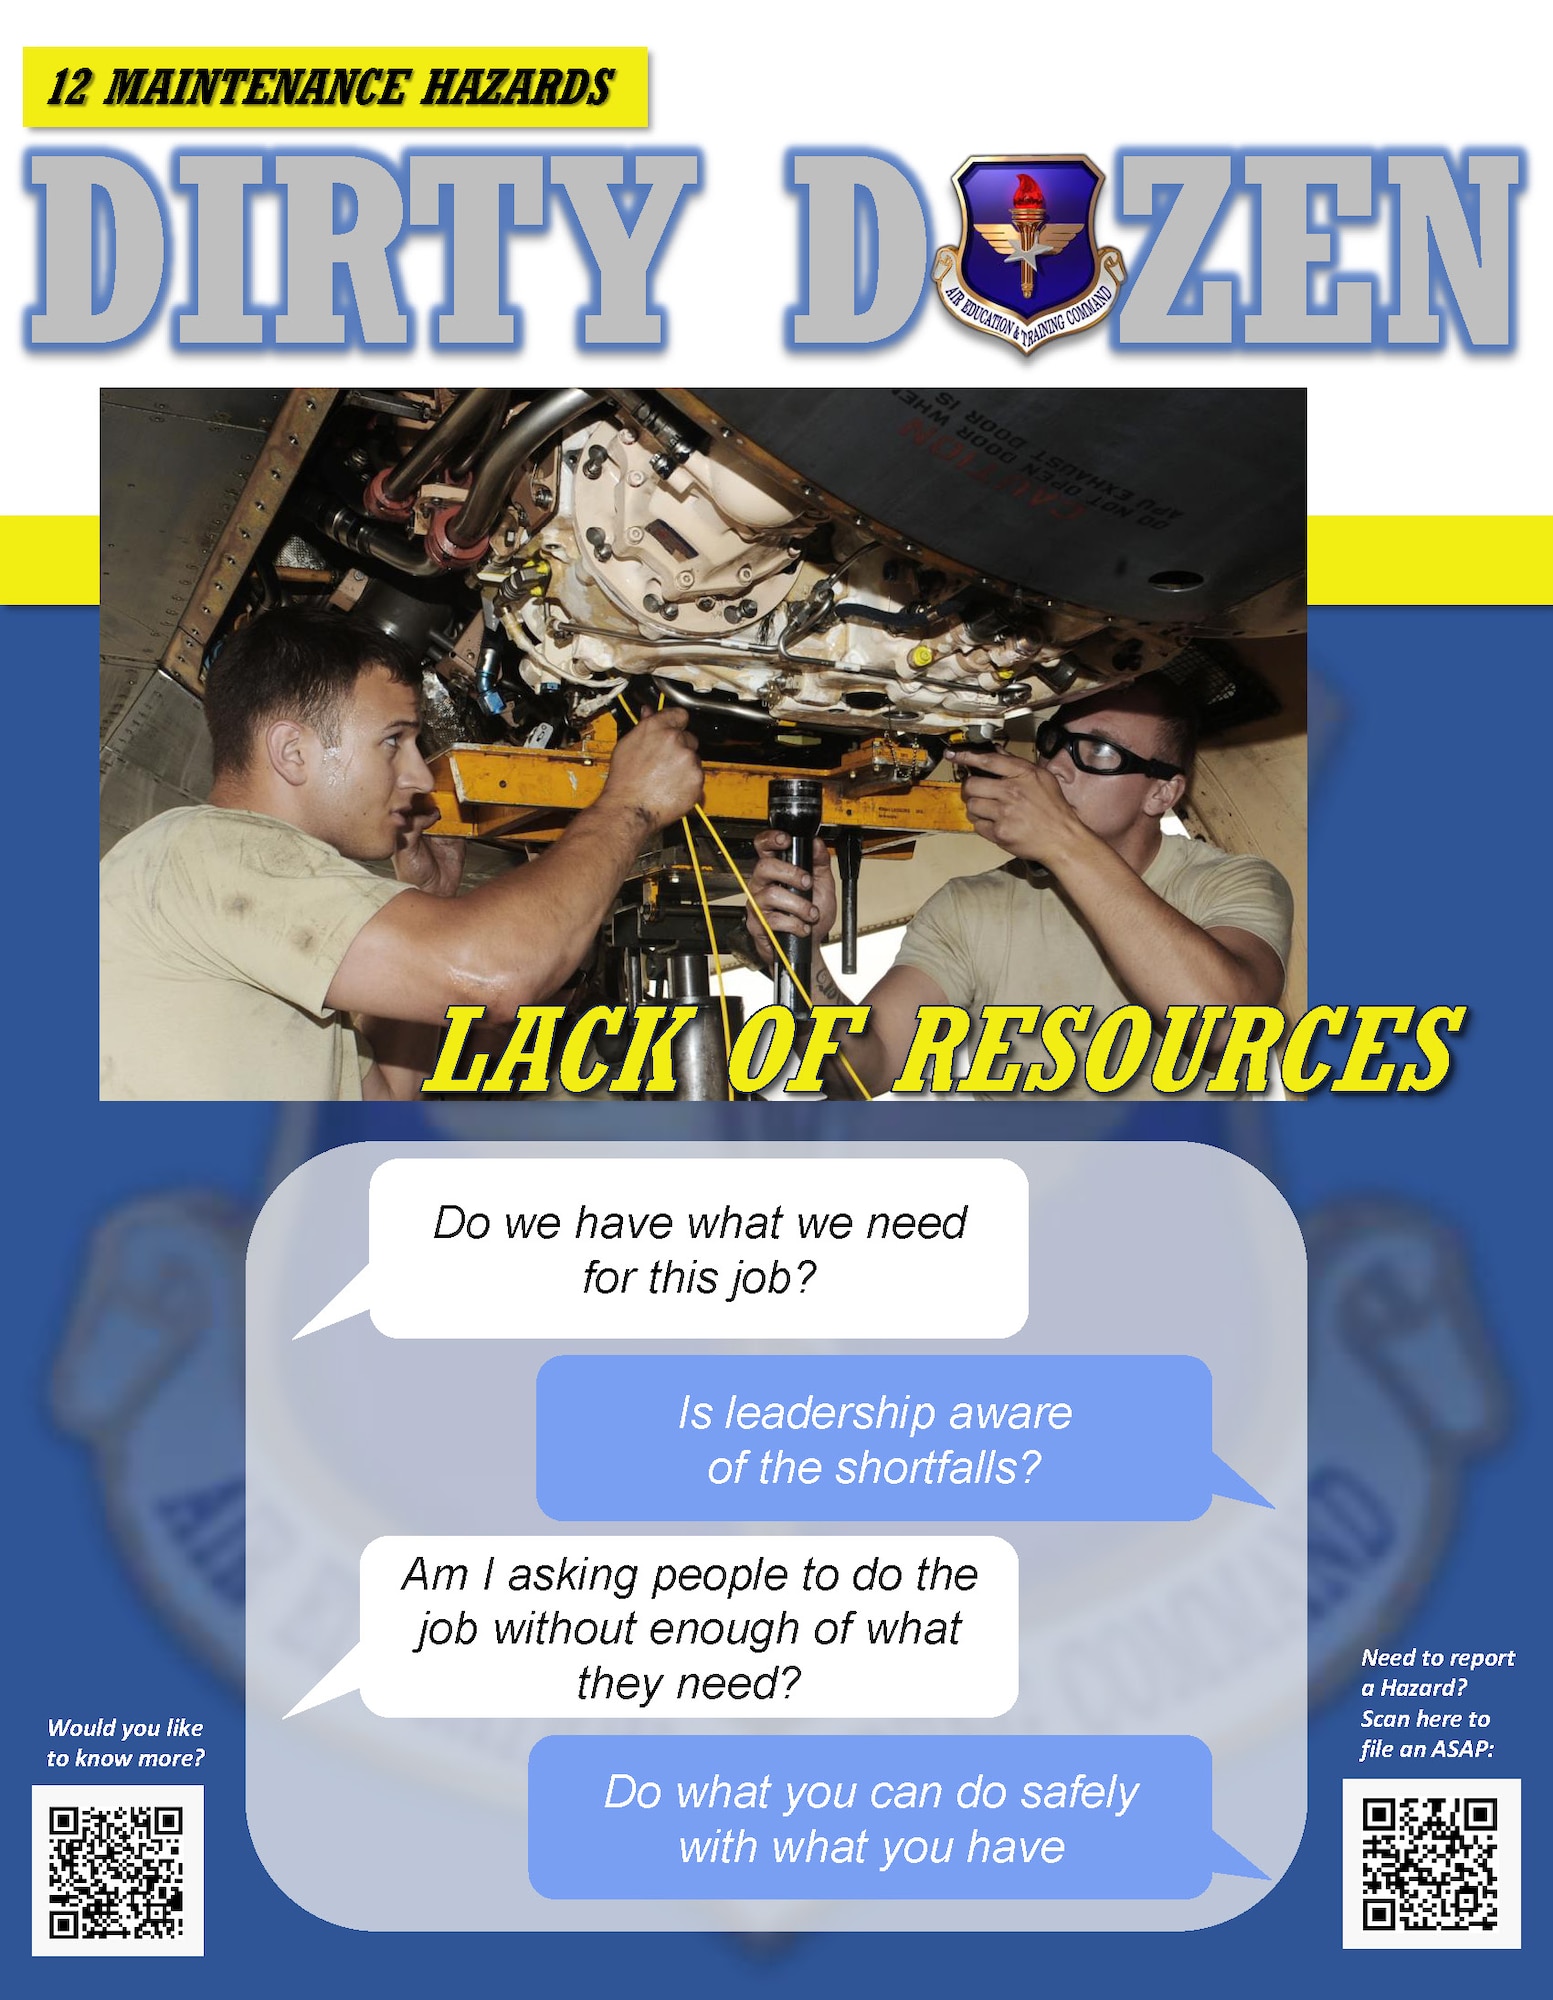 Lack of resources is one of the Dirty Dozen, which highlights common human error factors in aircraft maintenance mishaps.